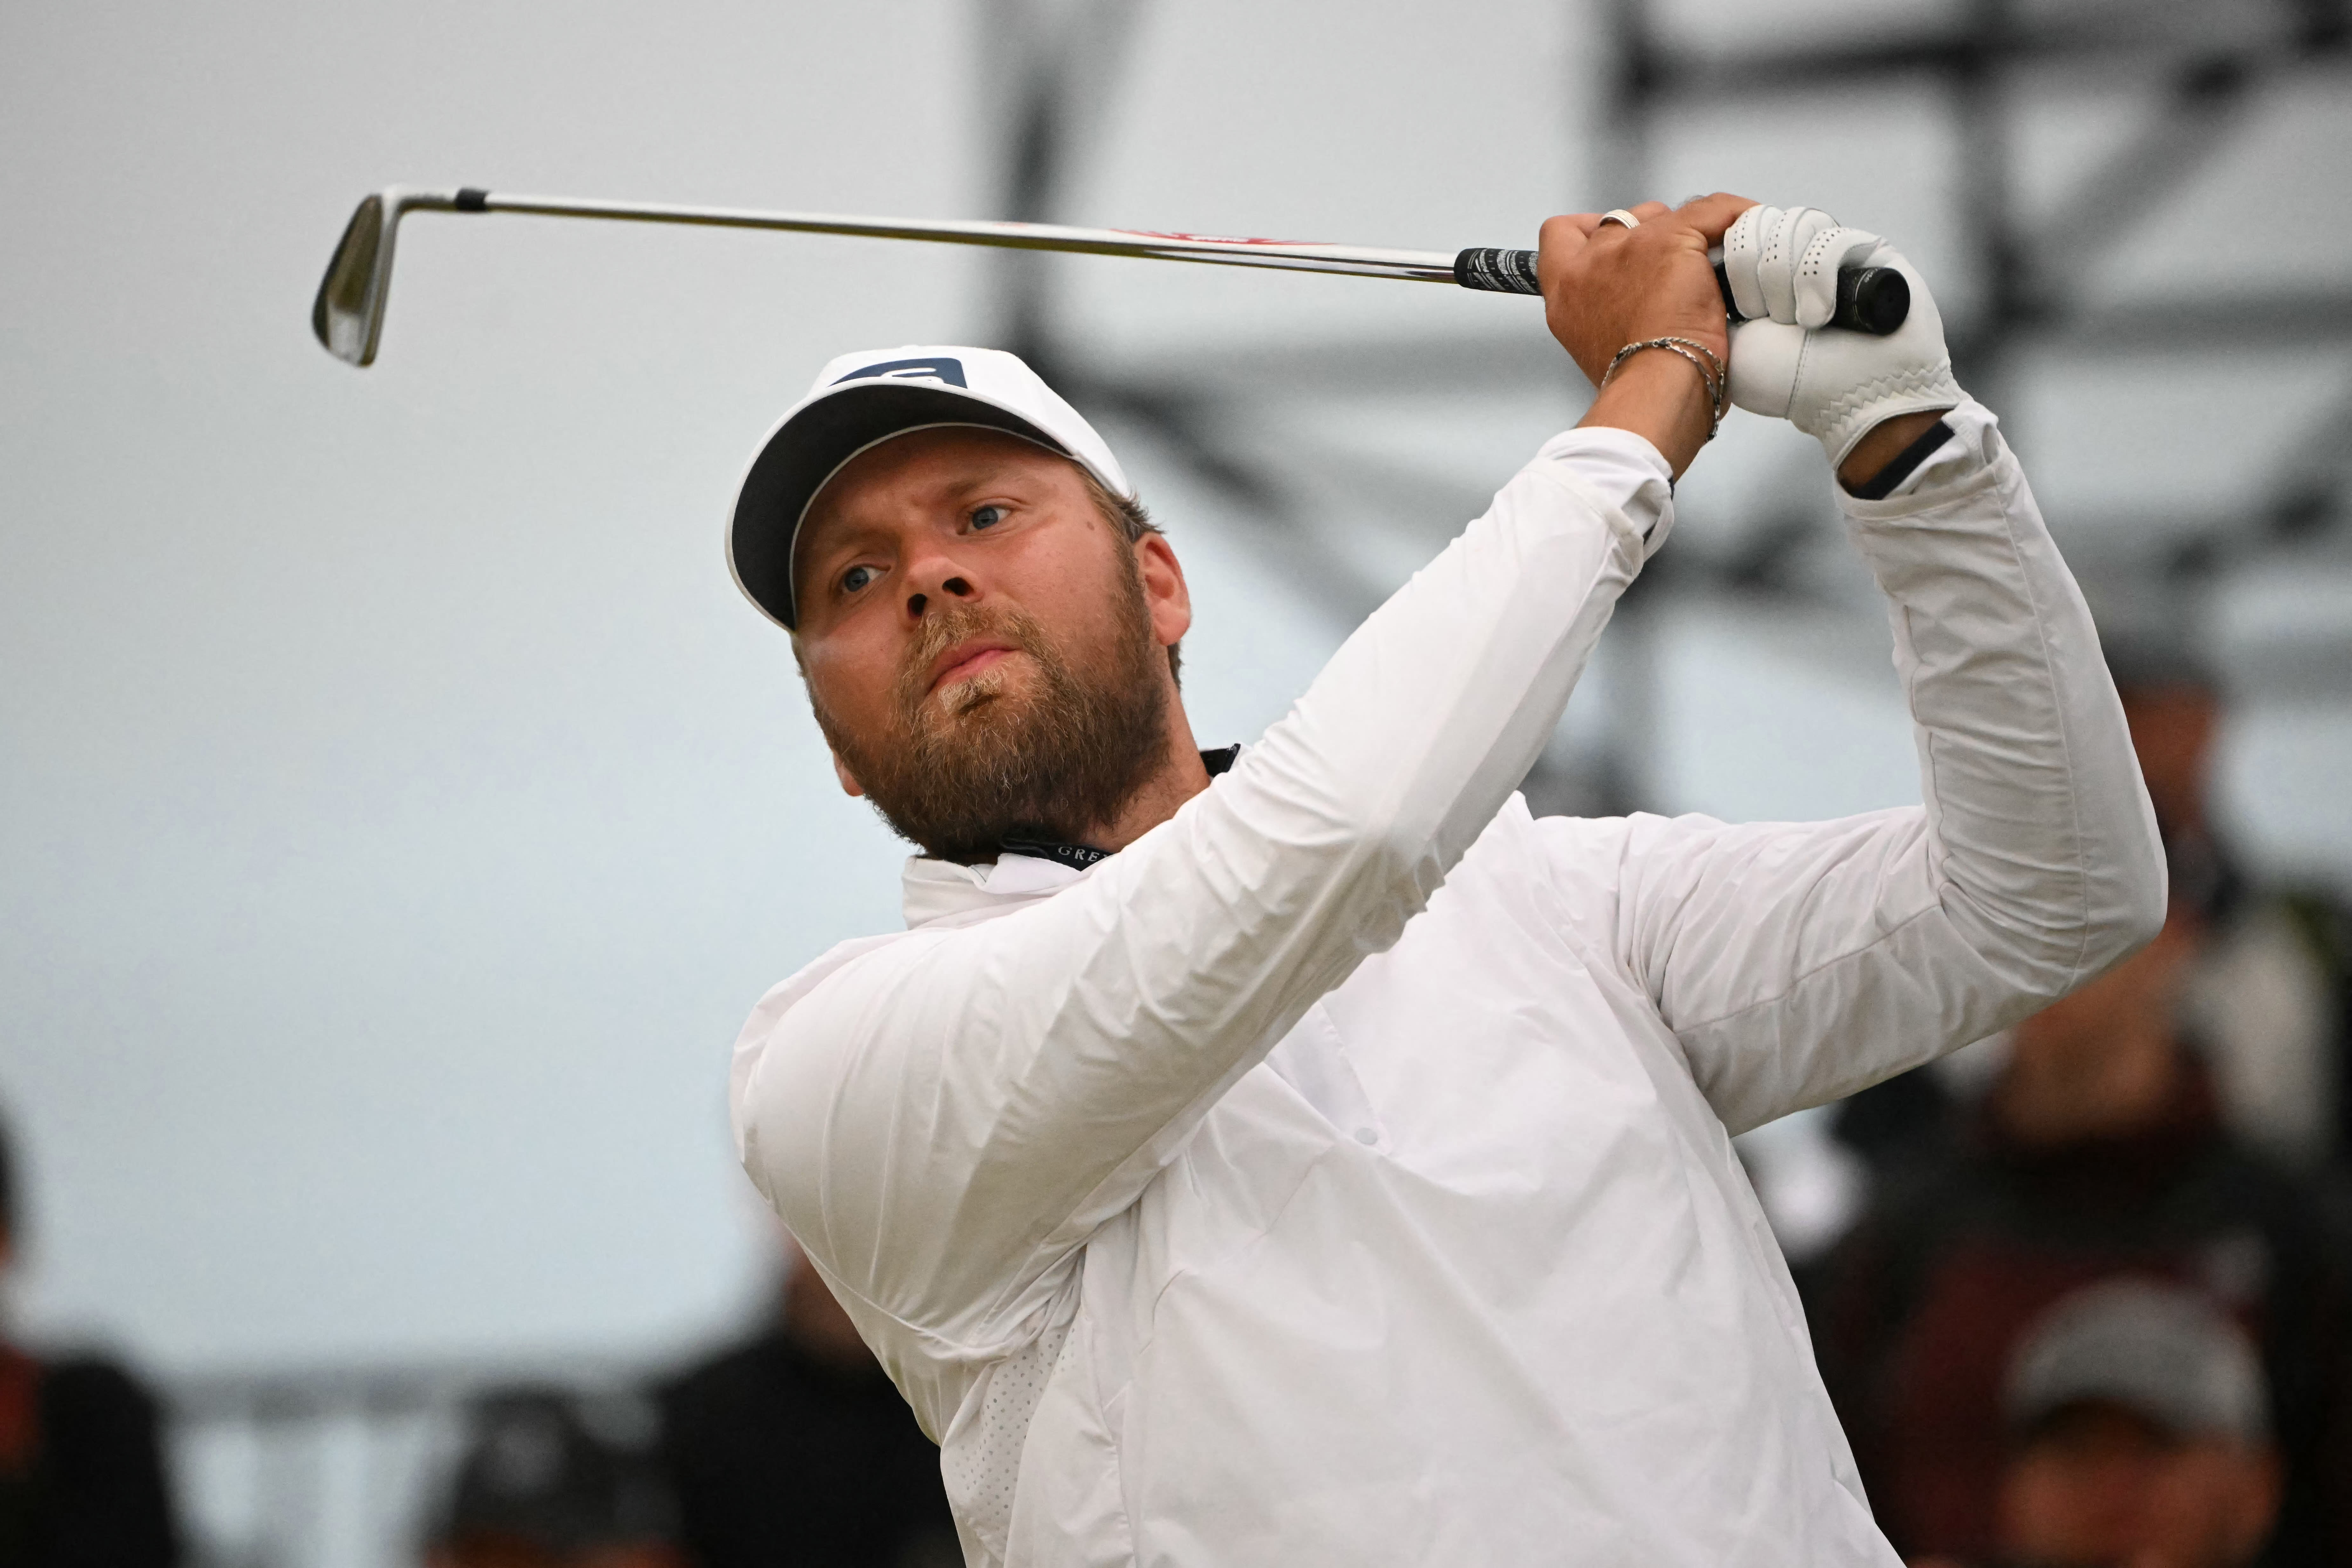 British Open first round leaderboard, live updates: Daniel Brown overtakes Shane Lowry for solo lead after Thursday